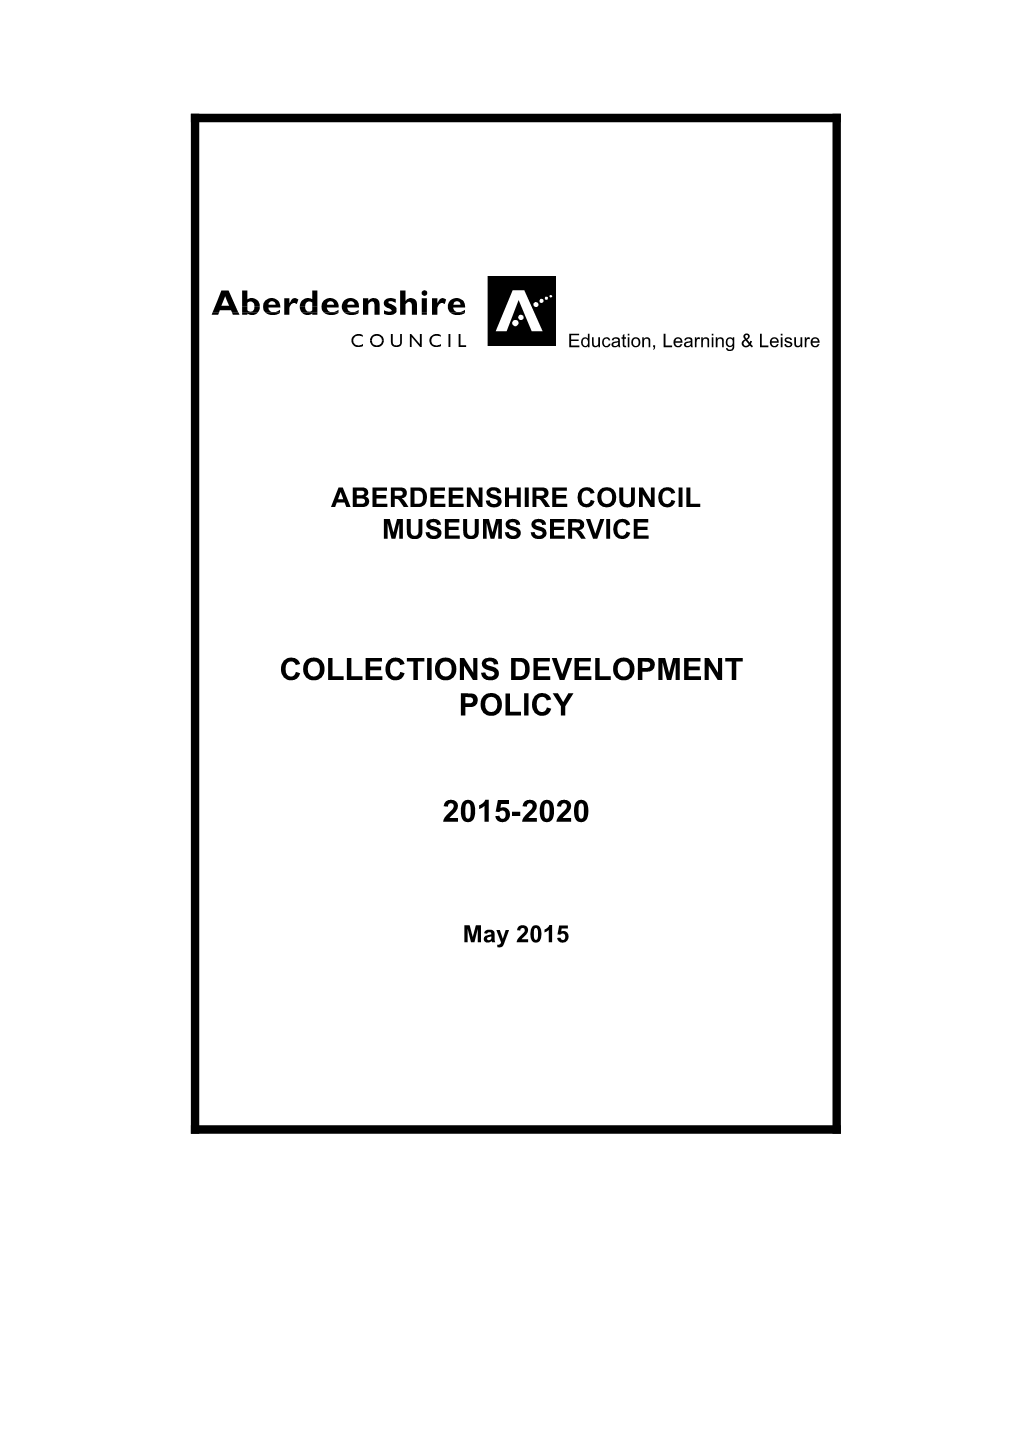 Name of Museum: Aberdeenshire Museums Service